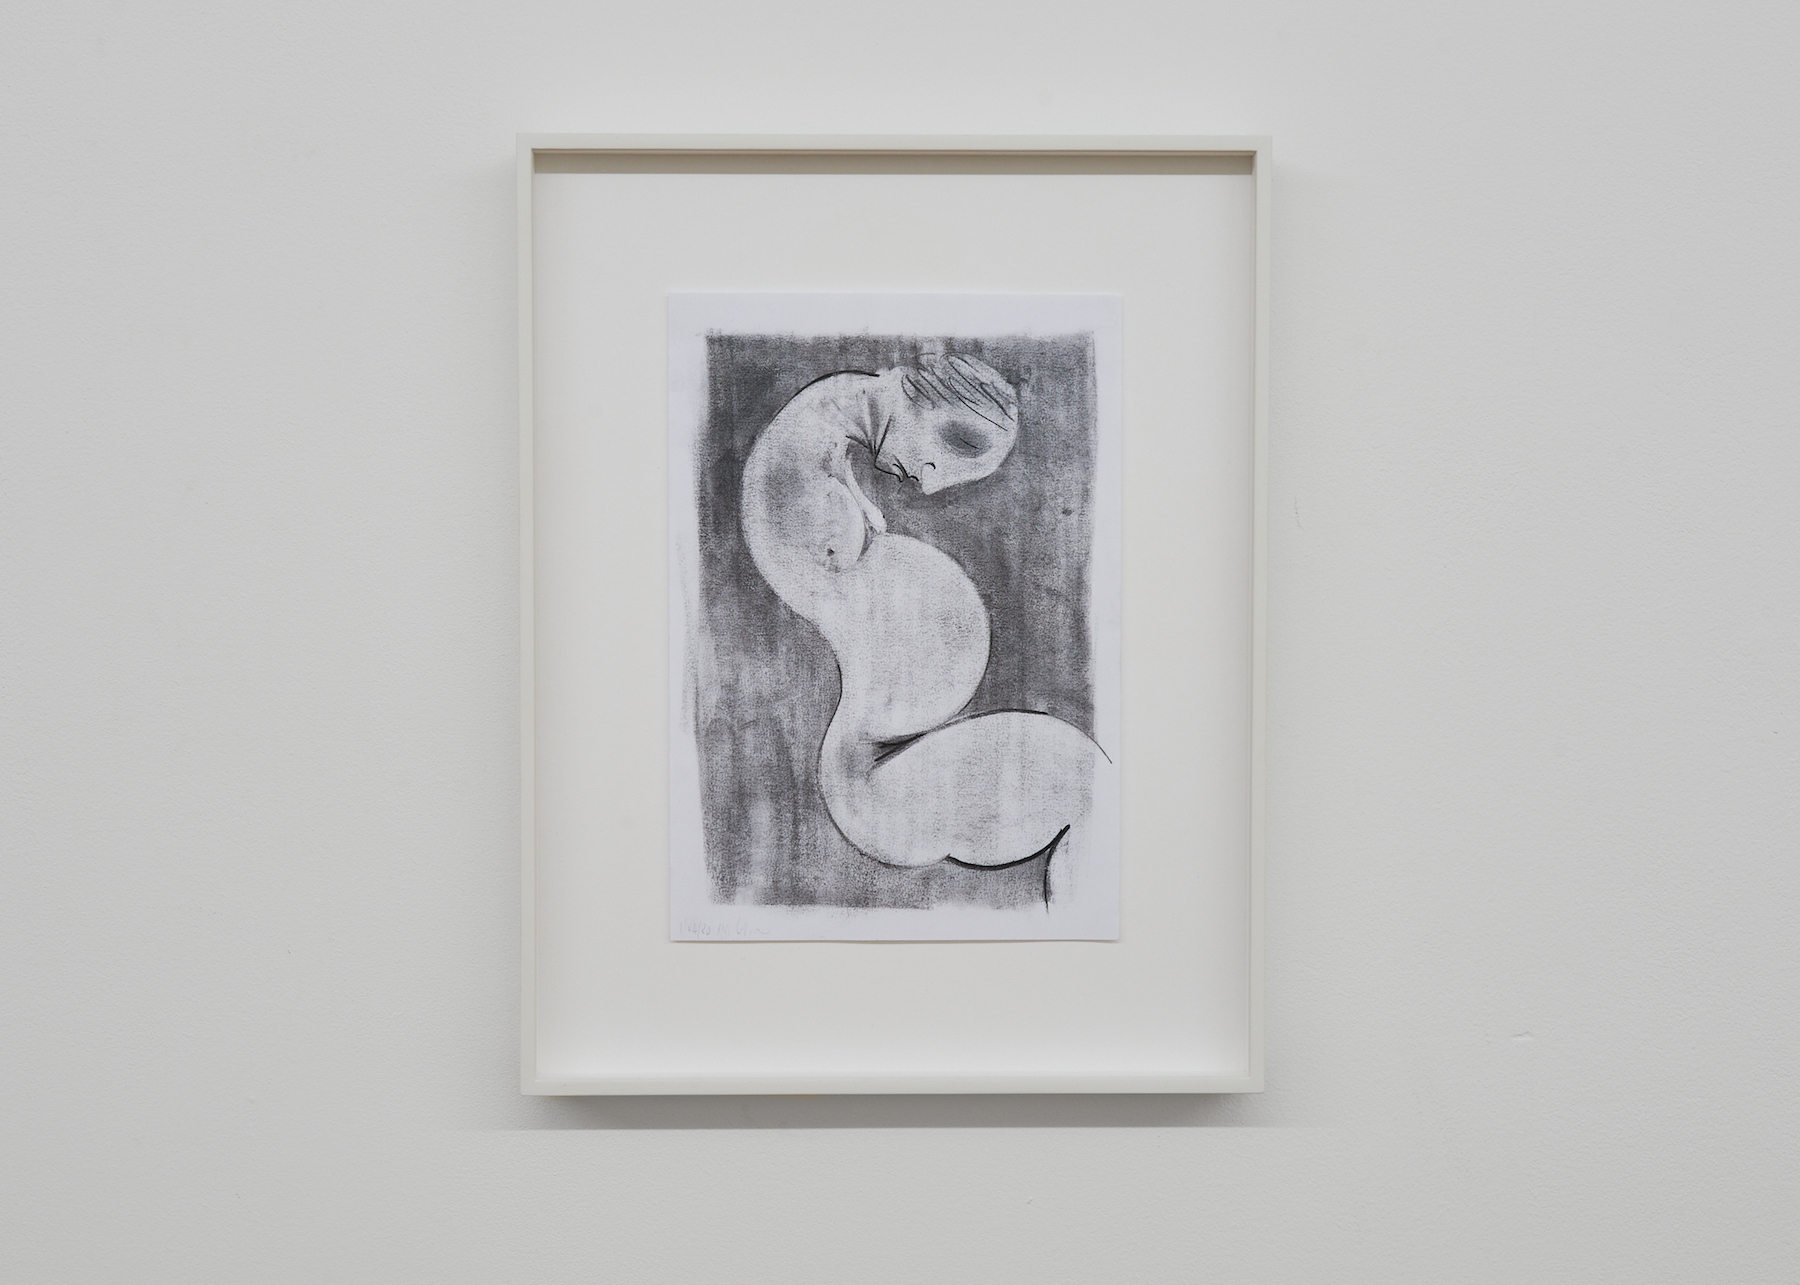 Mark Barker, as yet untitled (headache), b , 2020, Charcoal and graphite on paper, 42,5 x 34,5 cm